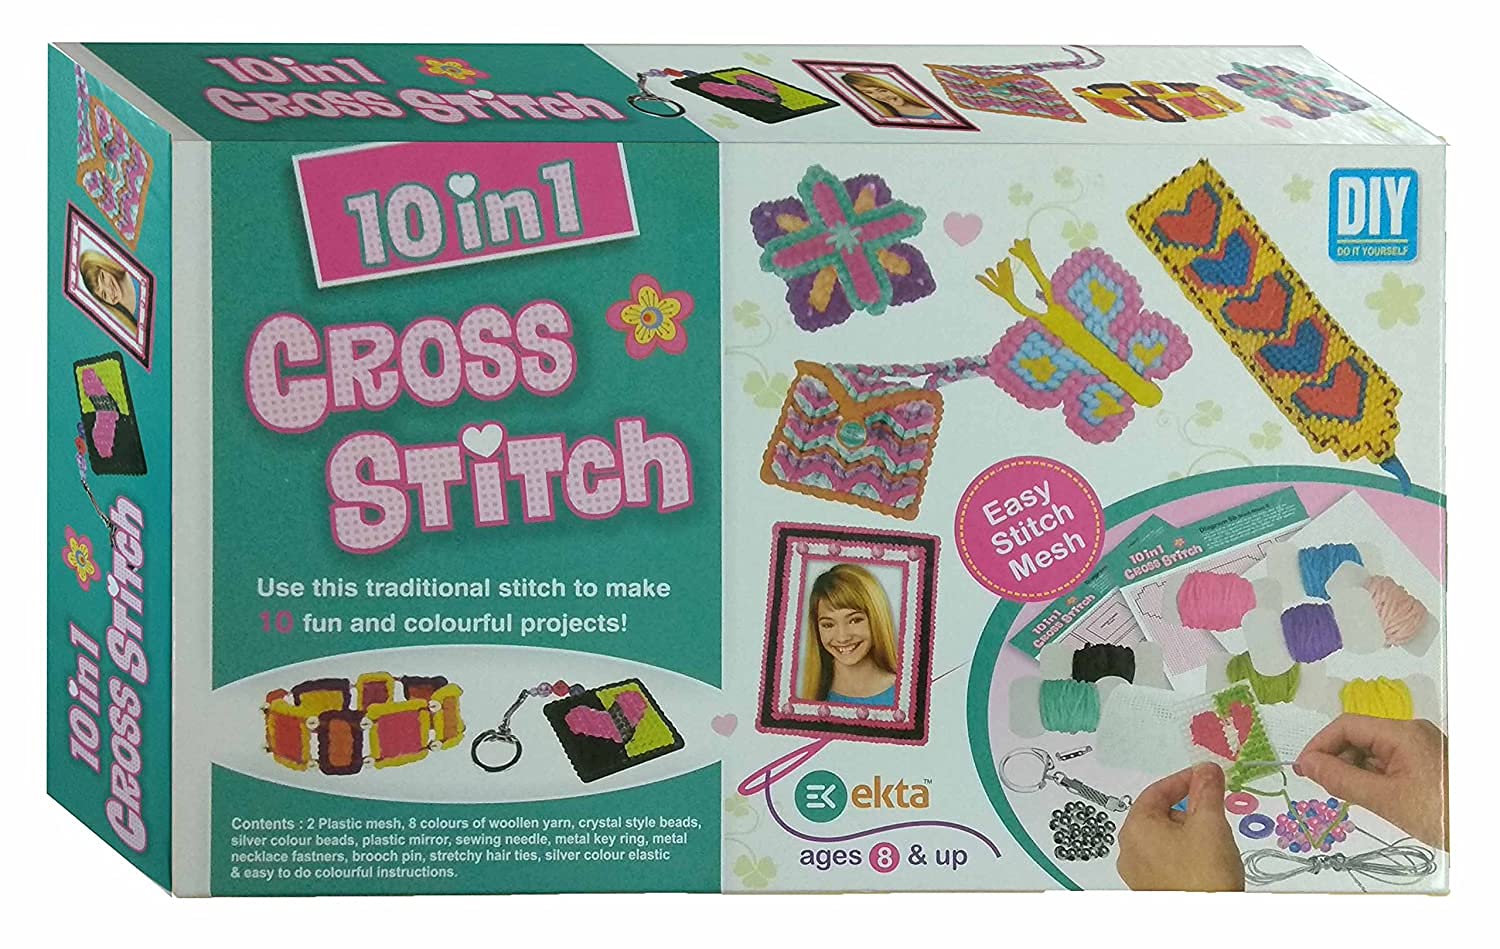 EKTA Cross Stitch 10 in 1 Art and Craft Stitching Game To Make 10 Colourful Projects For Kids- Multi color, Fabric; Plastic